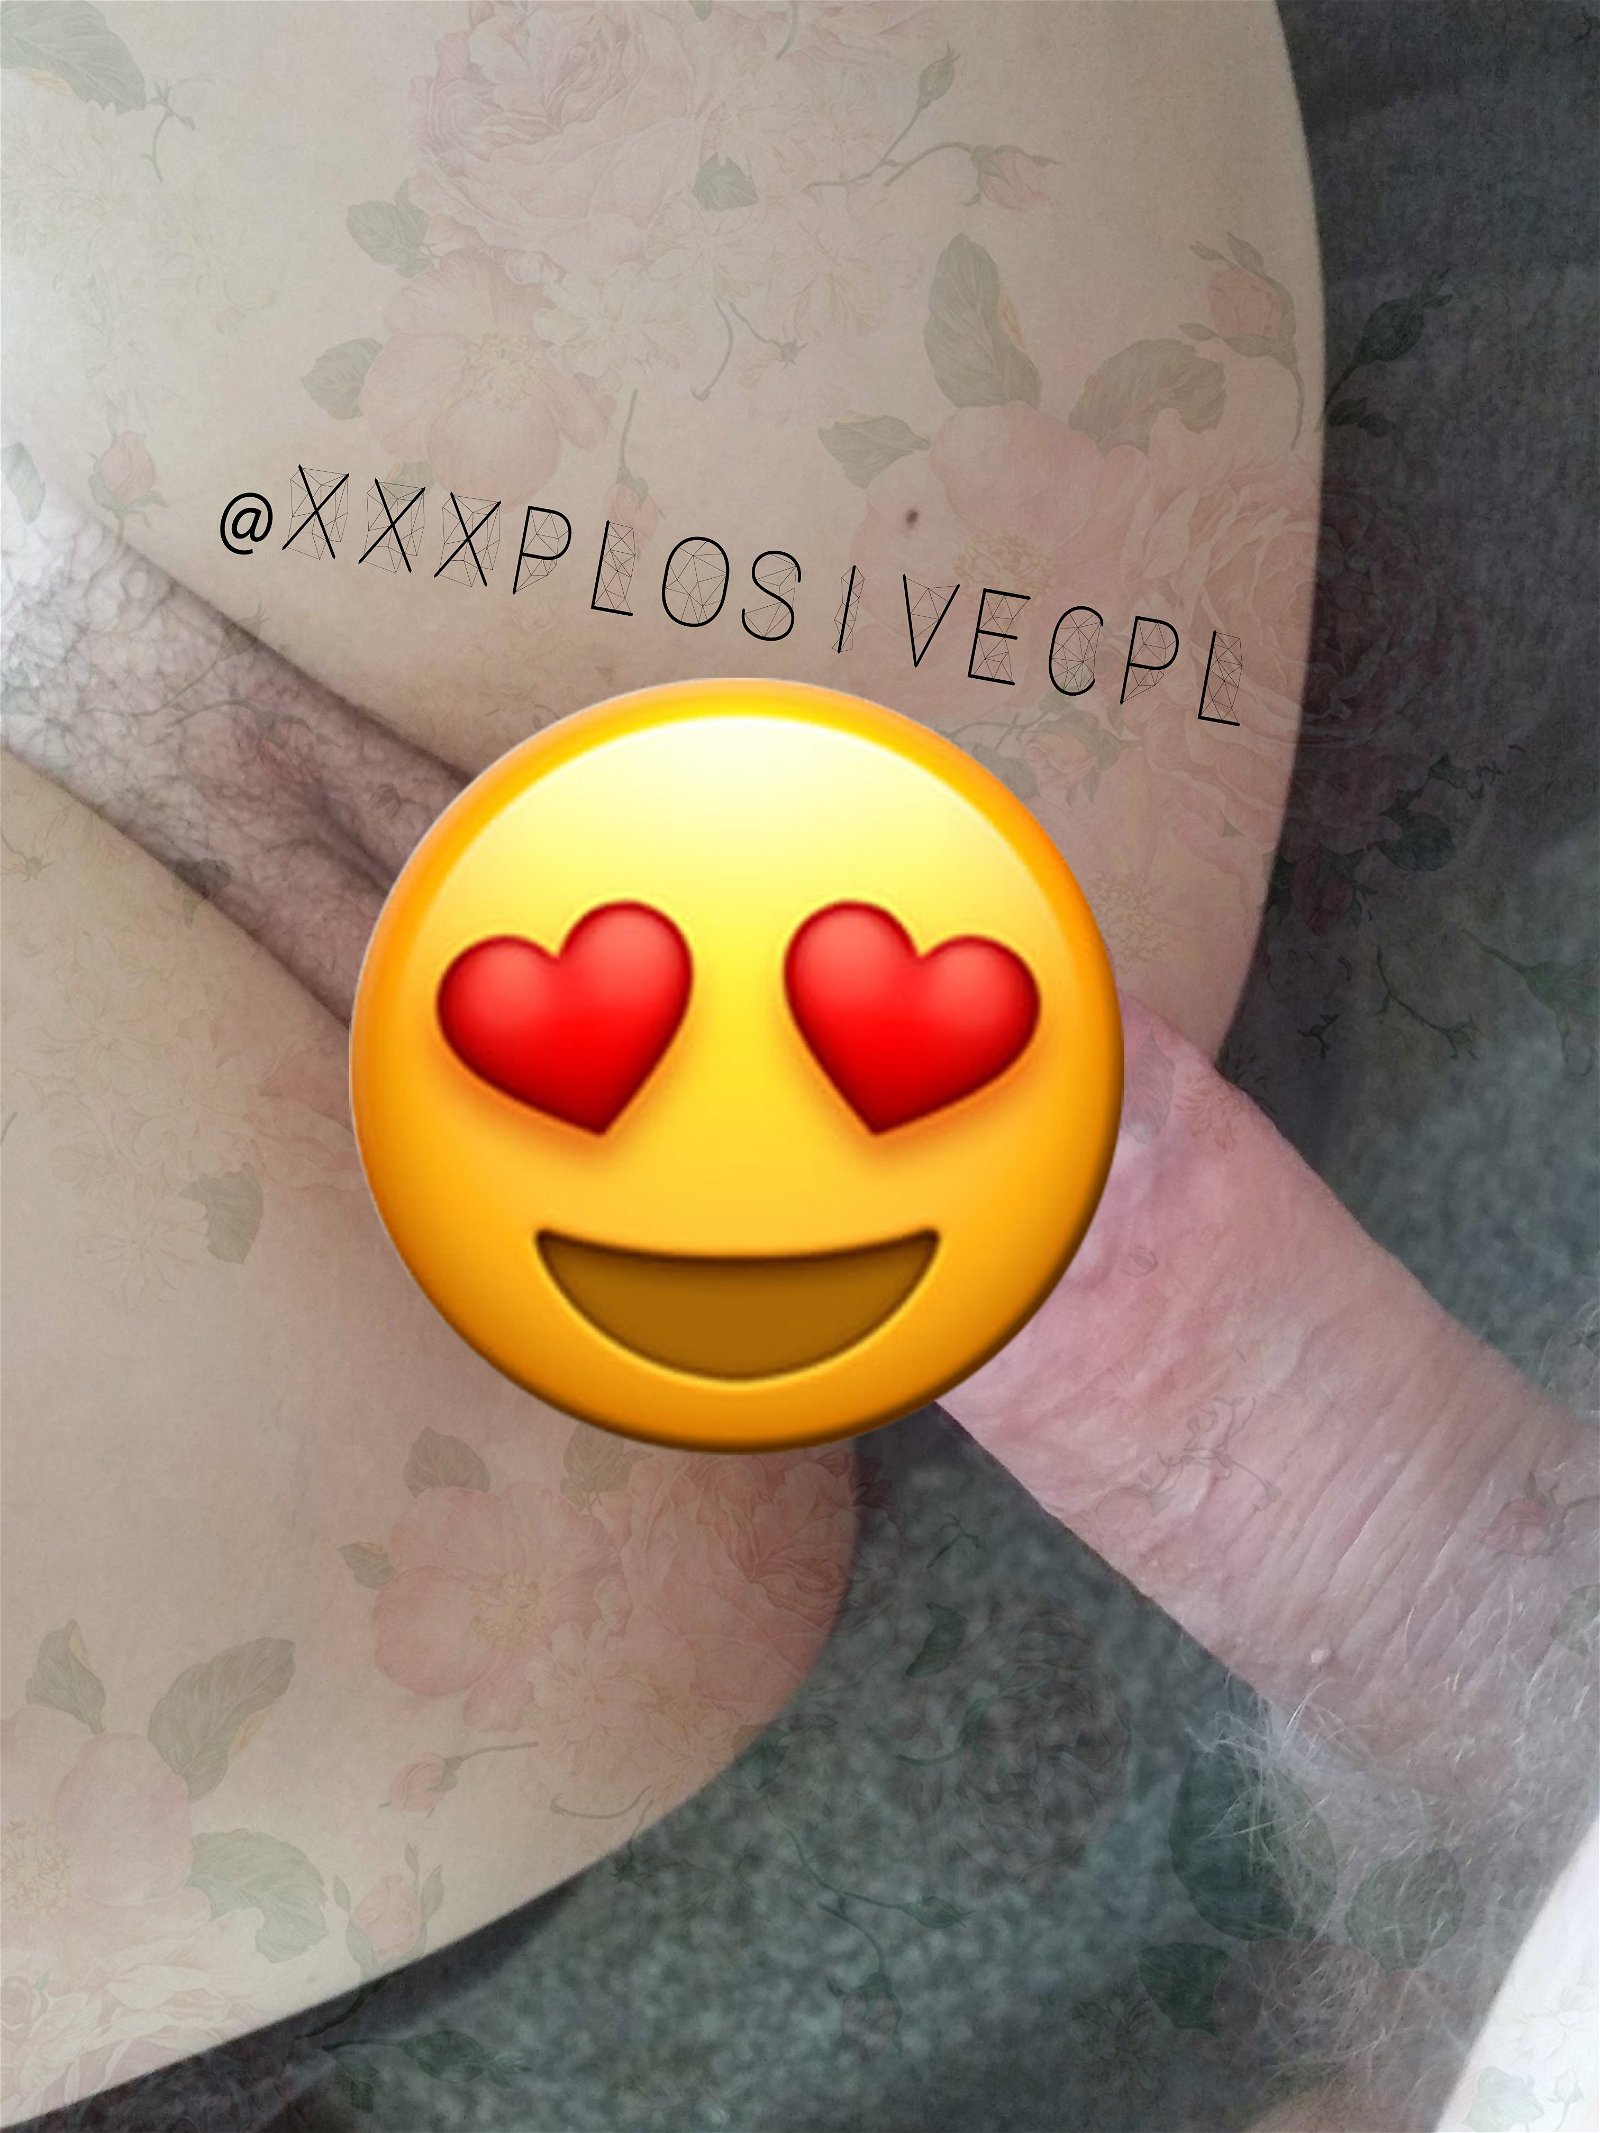 Watch the Photo by XXXplosivecpl with the username @xxxplosivecpl, posted on February 21, 2020